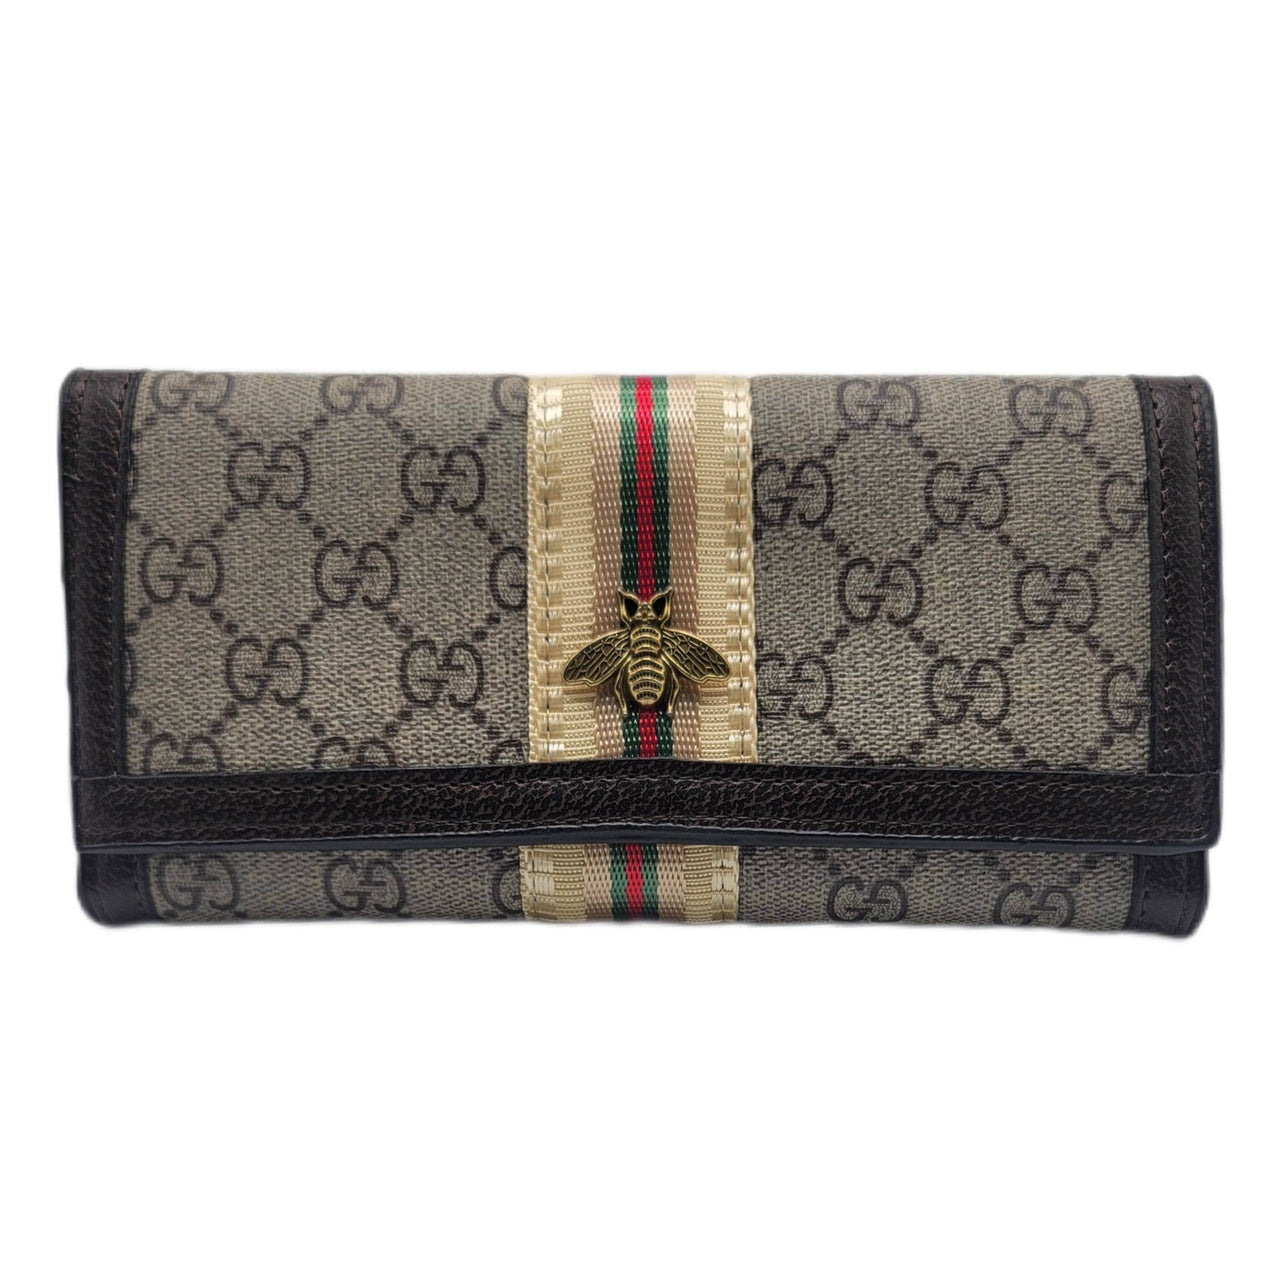 The Bag Couture Luggage & Bags Gucci 3 Fold Wallet Classic Bee Brown